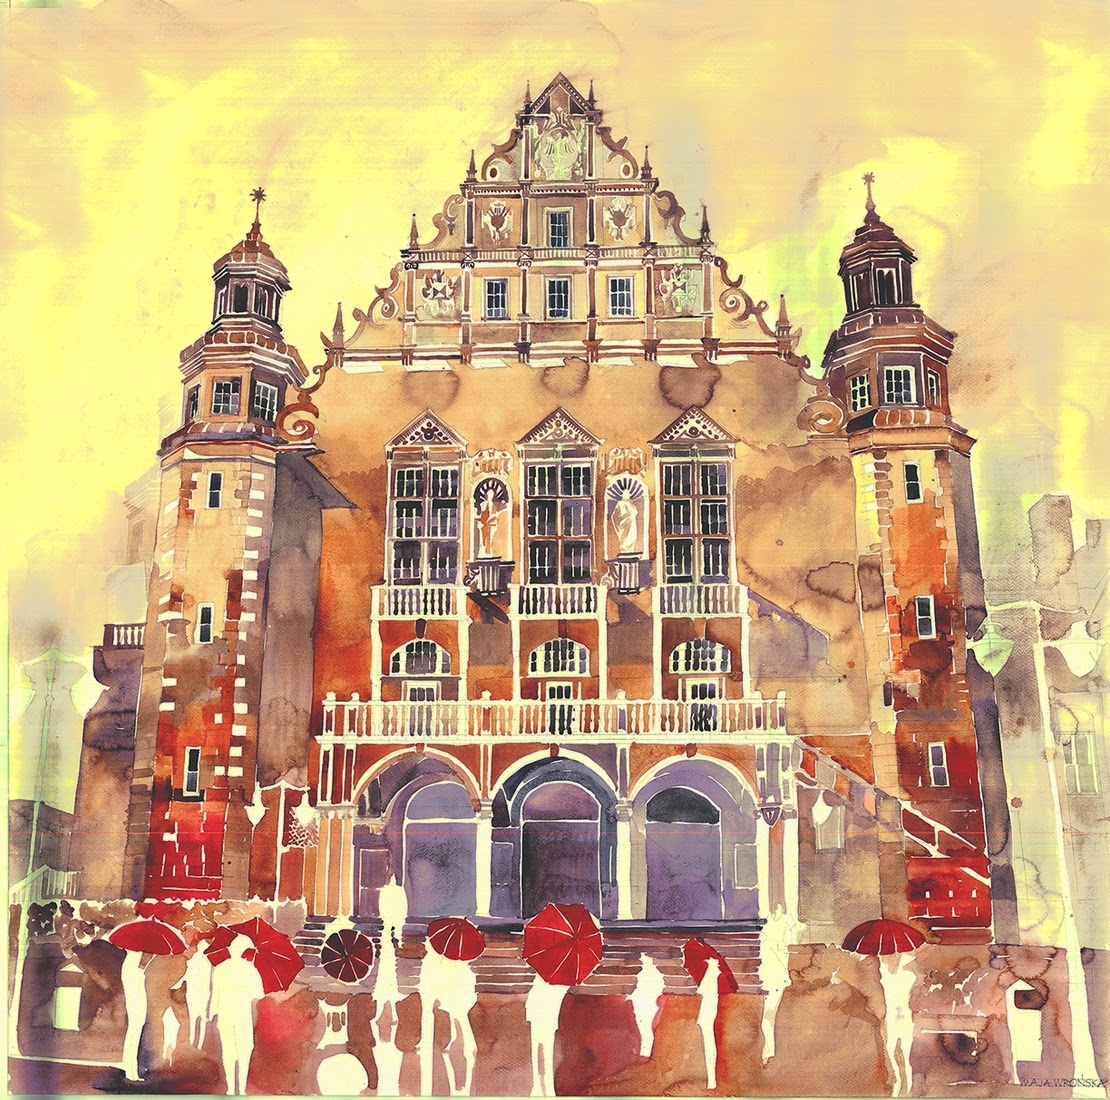 15-Maja-Wrońska-Architectural-Paintings-and-Drawing-Sketces-www-designstack-co